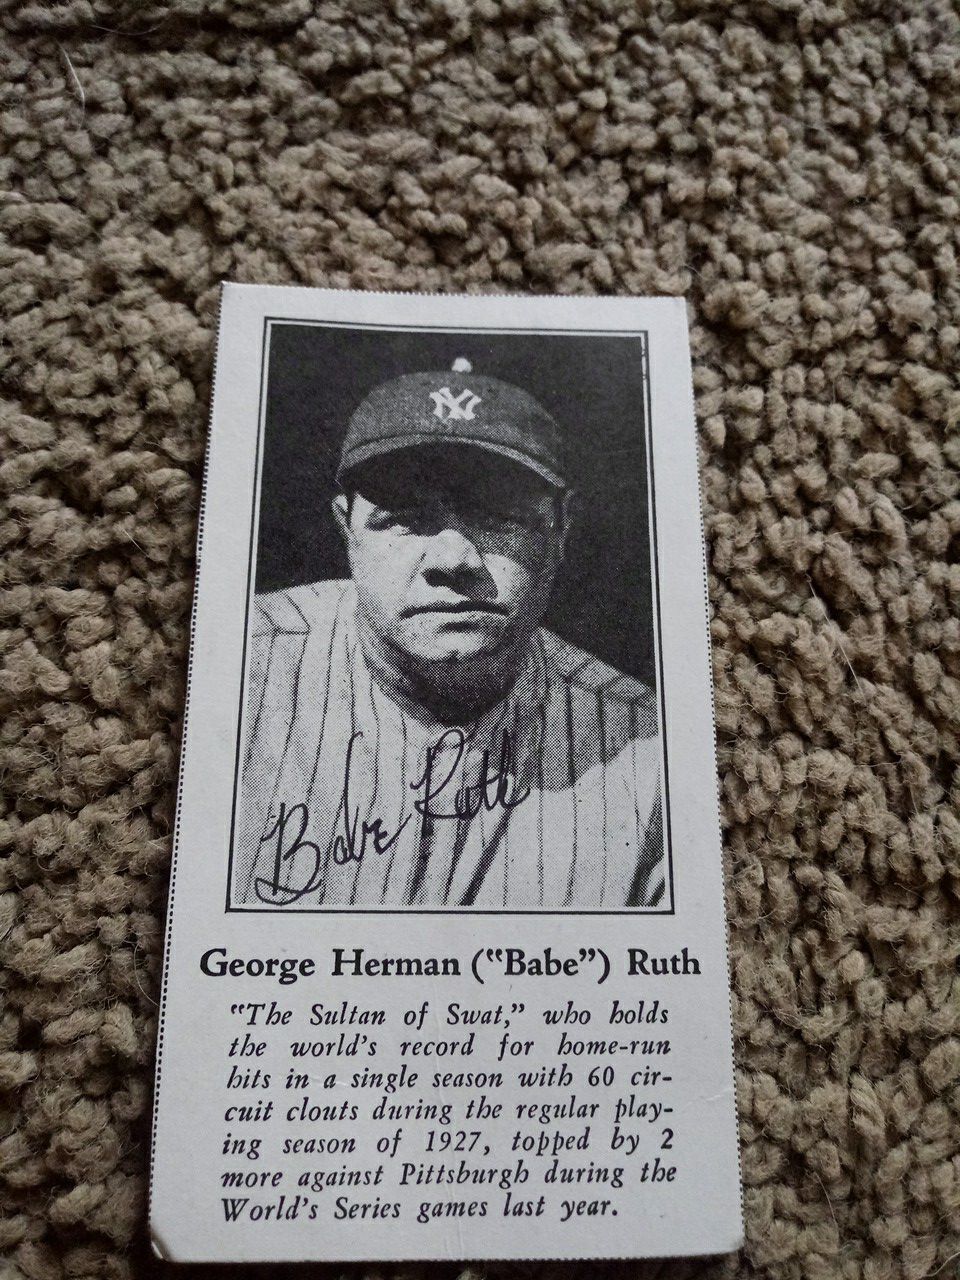 Old Babe Ruth card signed? Found at yard sale! Read